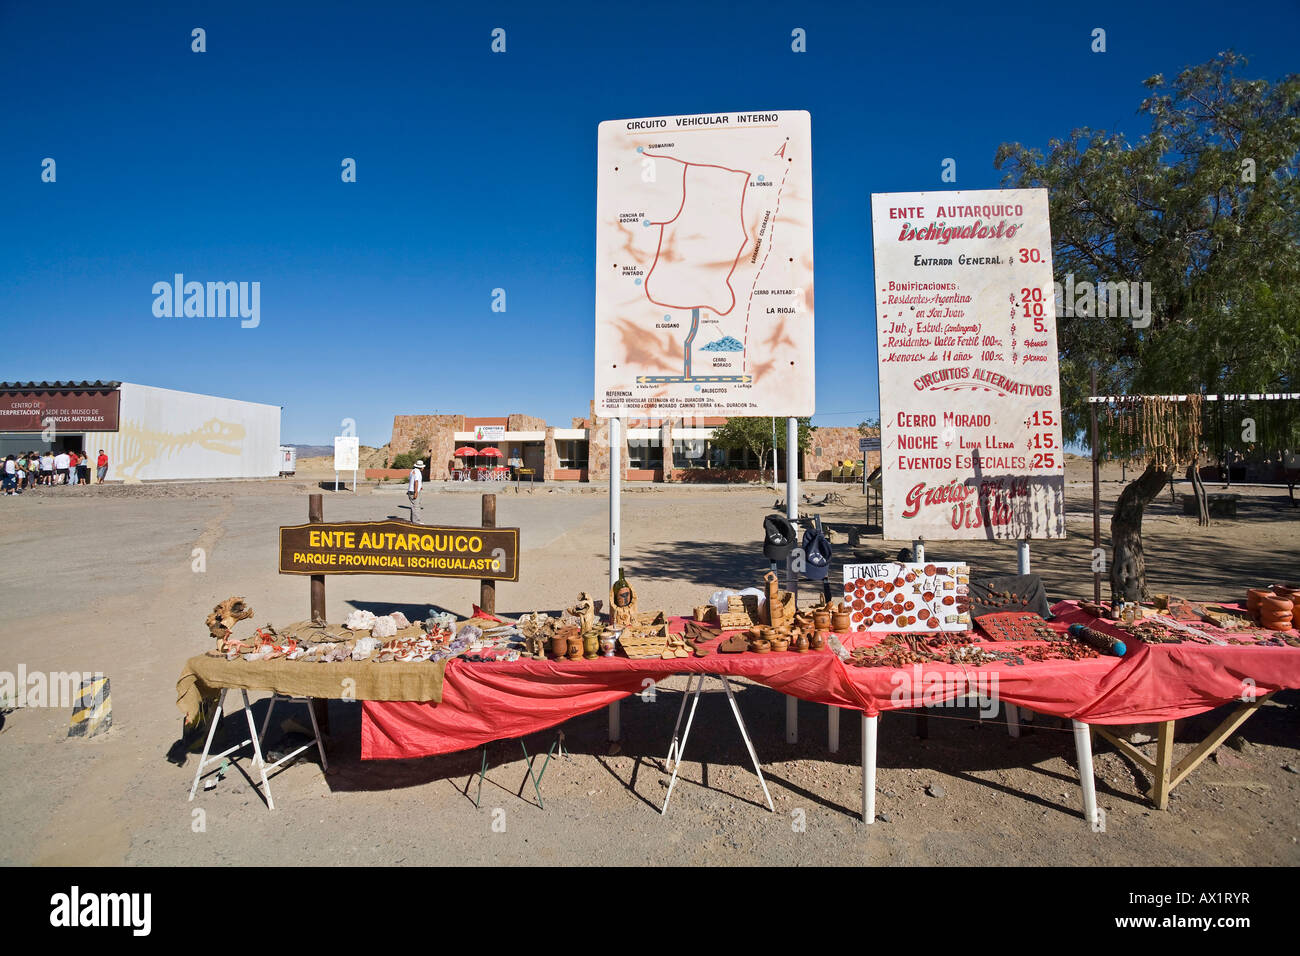 Sales booth and information panels at National Park Parque Provincial Ischigualasto, Central Andes, Argentina, South America Stock Photo